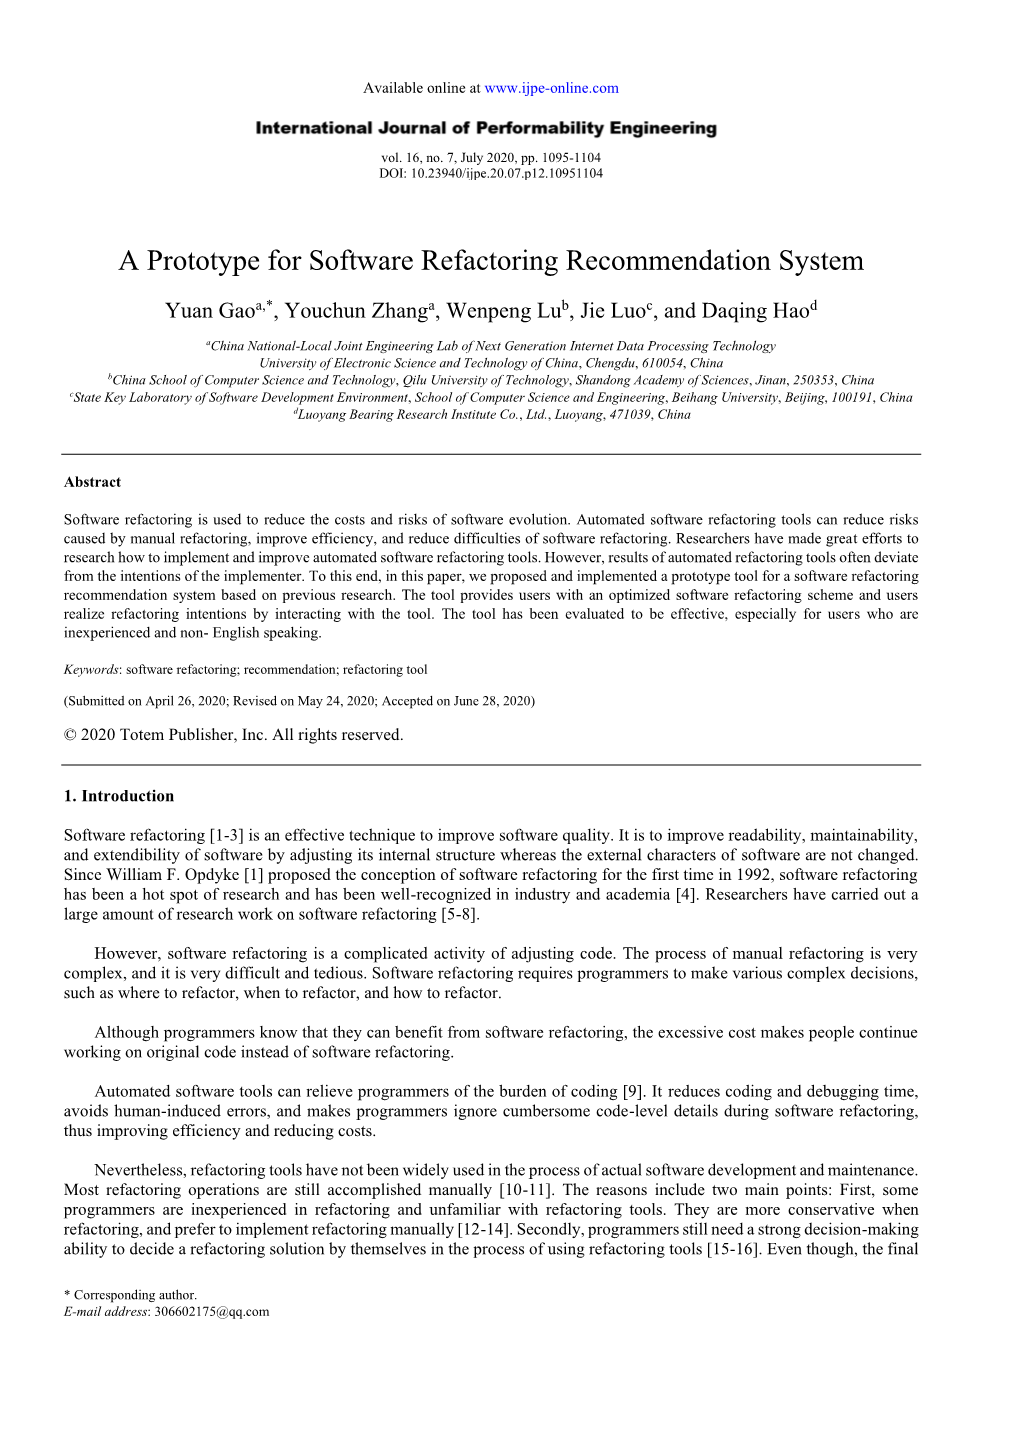 A Prototype for Software Refactoring Recommendation System